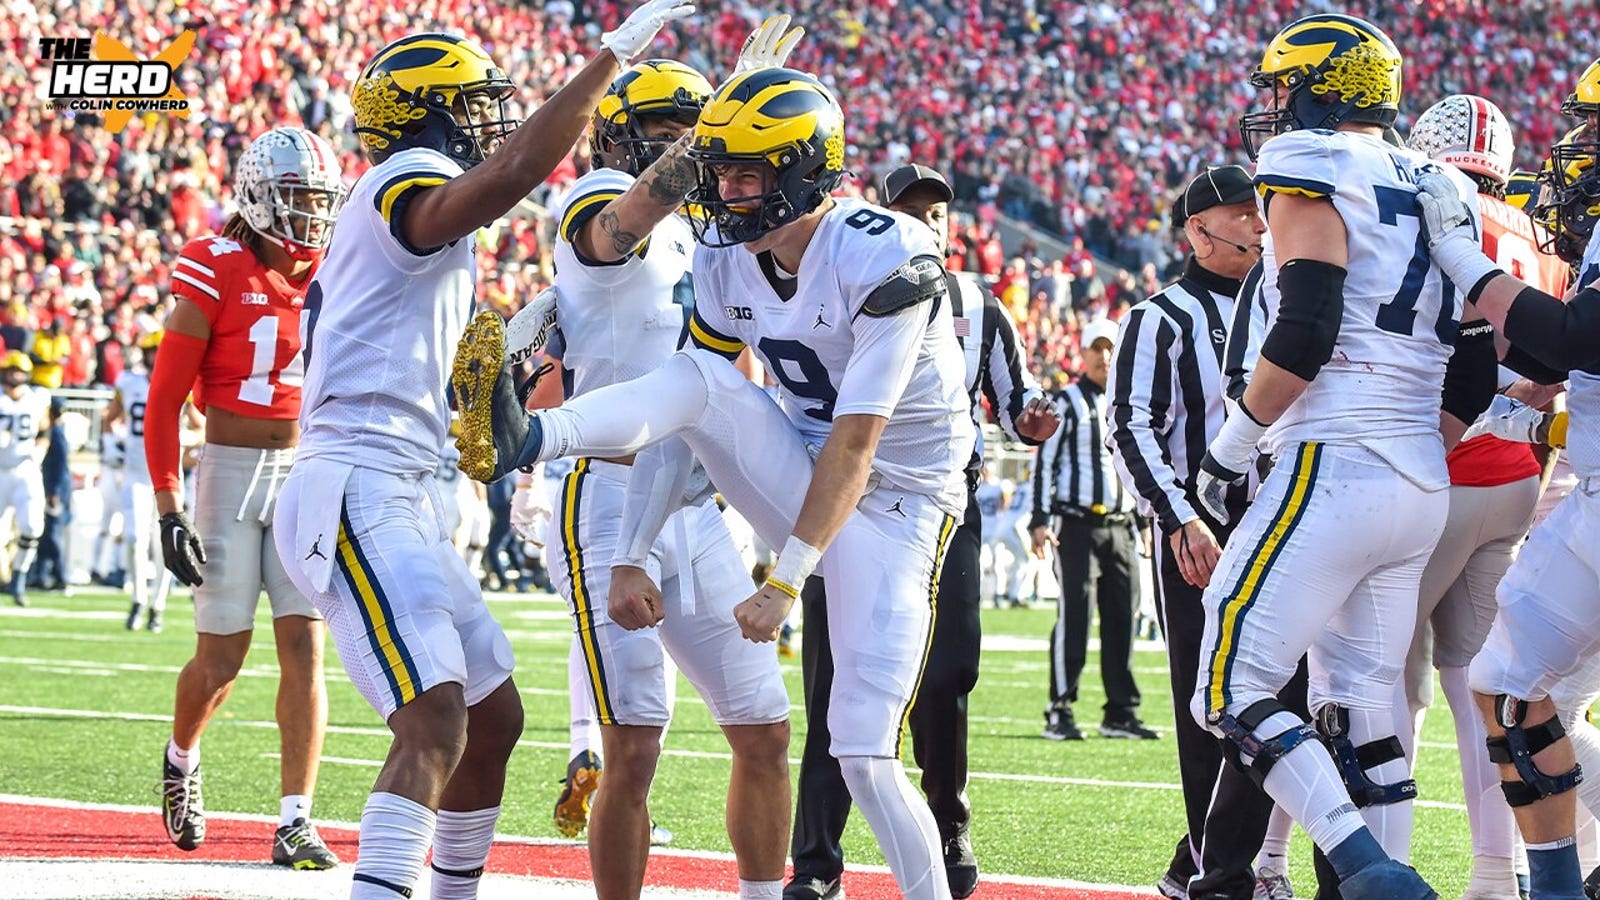 Has Michigan officially surpassed Ohio State?